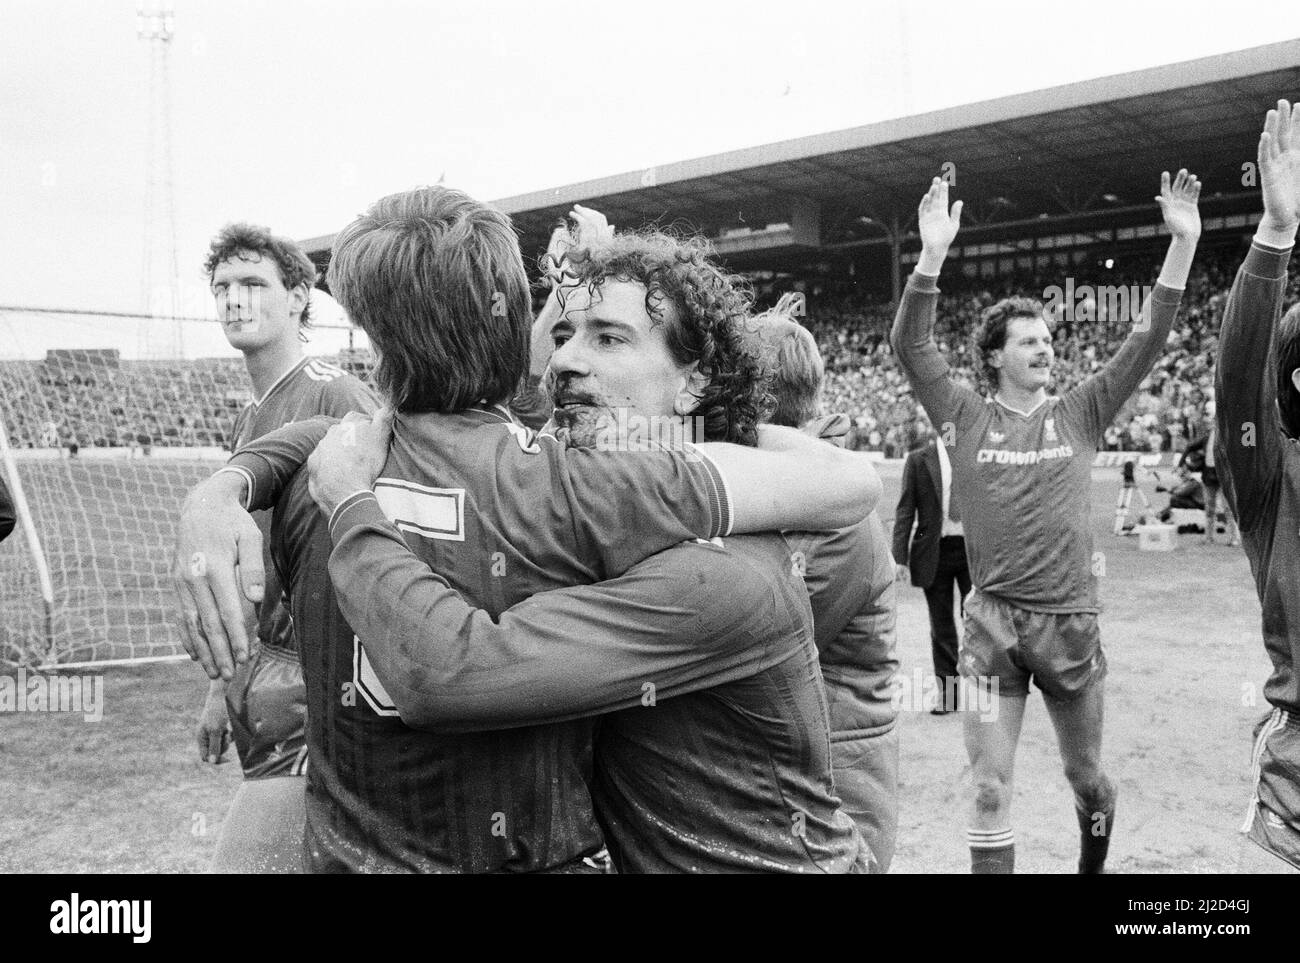 Chelsea 0-1 Liverpool, League match at Stamford Bridge, Saturday 3rd May 1986. Liverpool Football Club, win their last game of the season 1985/86 to clinch the First Division Title for a record 16th time. Celebrating Liverpool players left to right: Gary Gillespie, Ronnie Whelan, Craig Johnston and Kevin MacDonald. Stock Photo